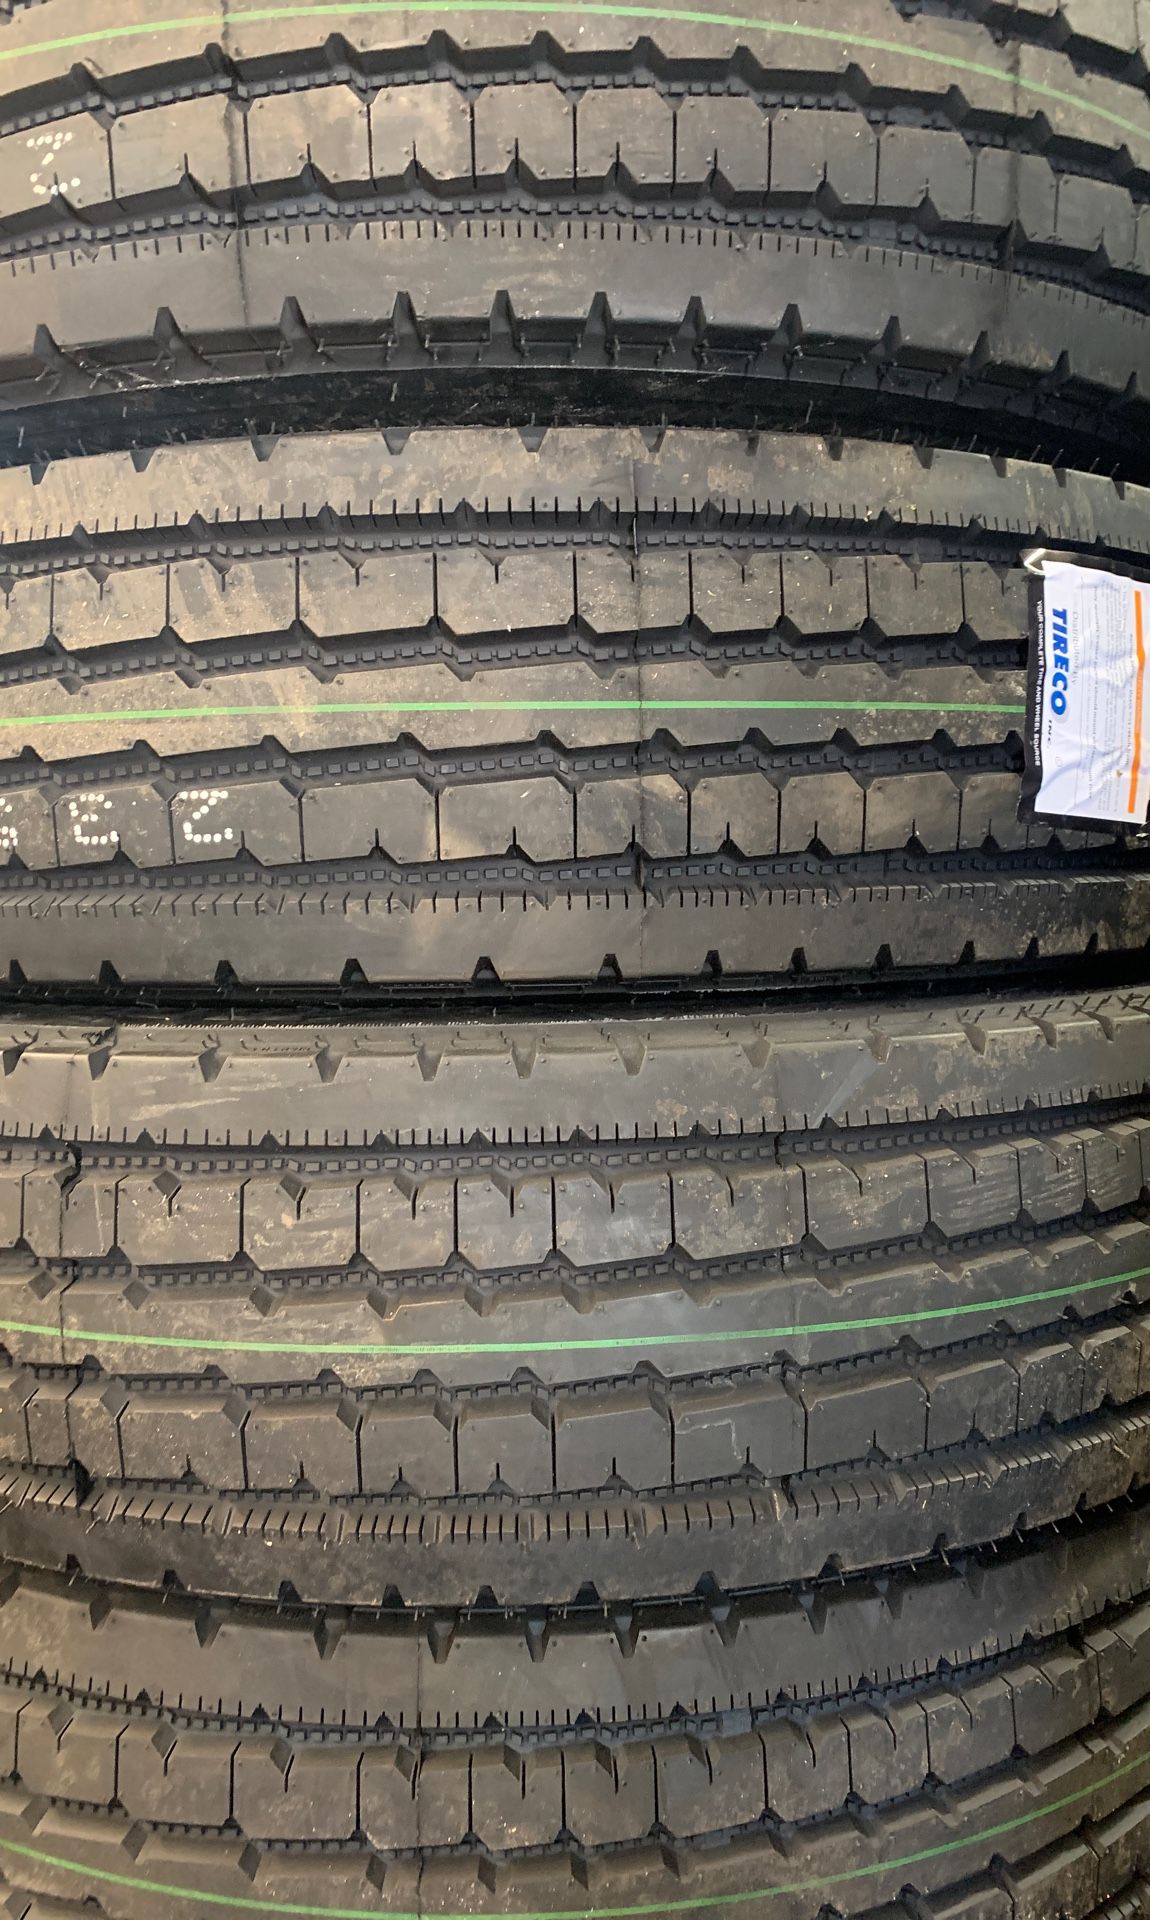 St 235-85-16s $850 14 ply tires